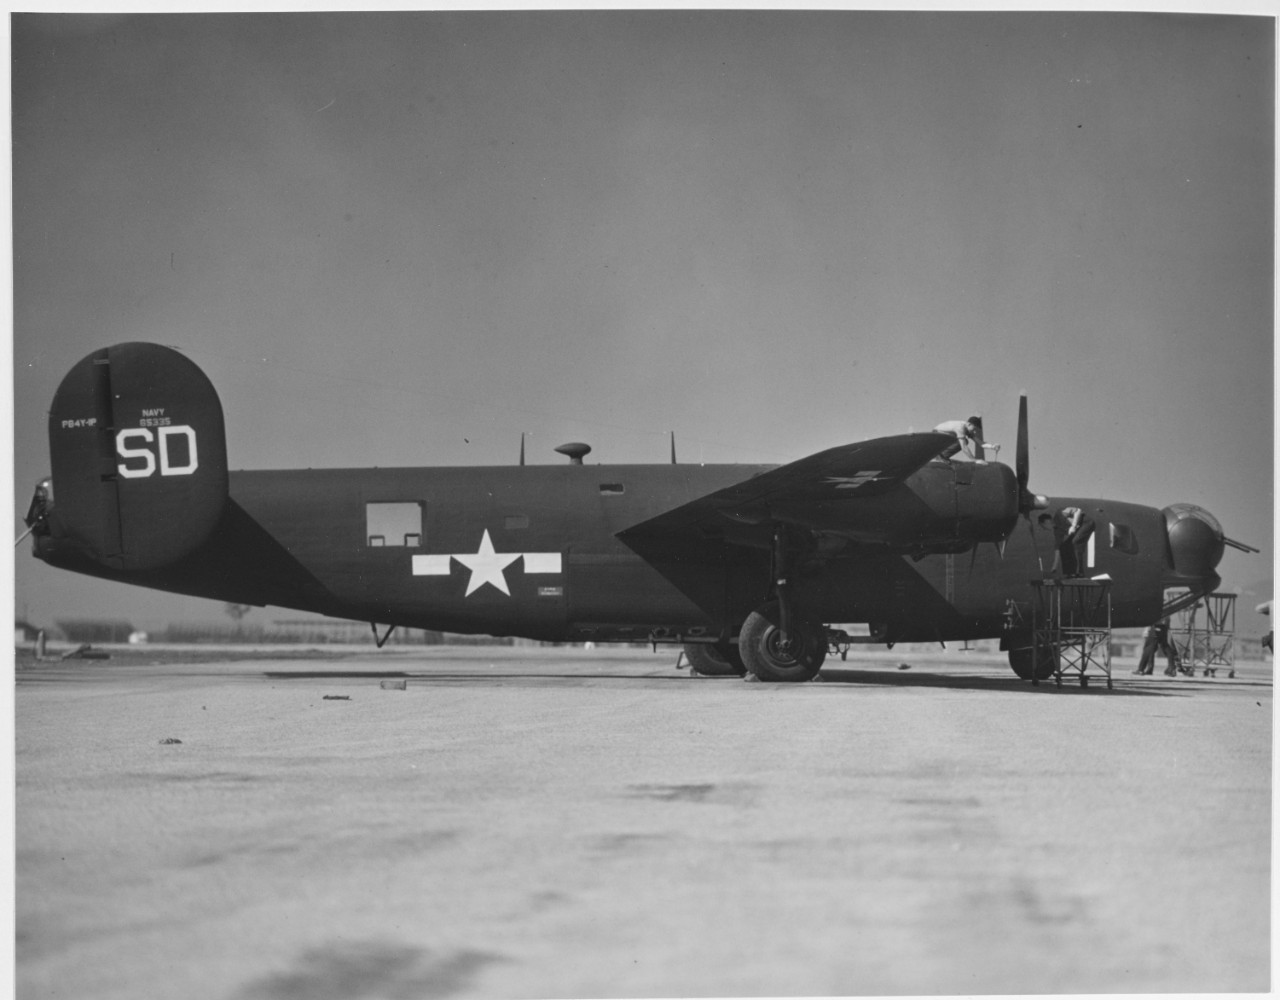 Consolidated PB4Y-1P, photographic aircraft (Bu# 65335)